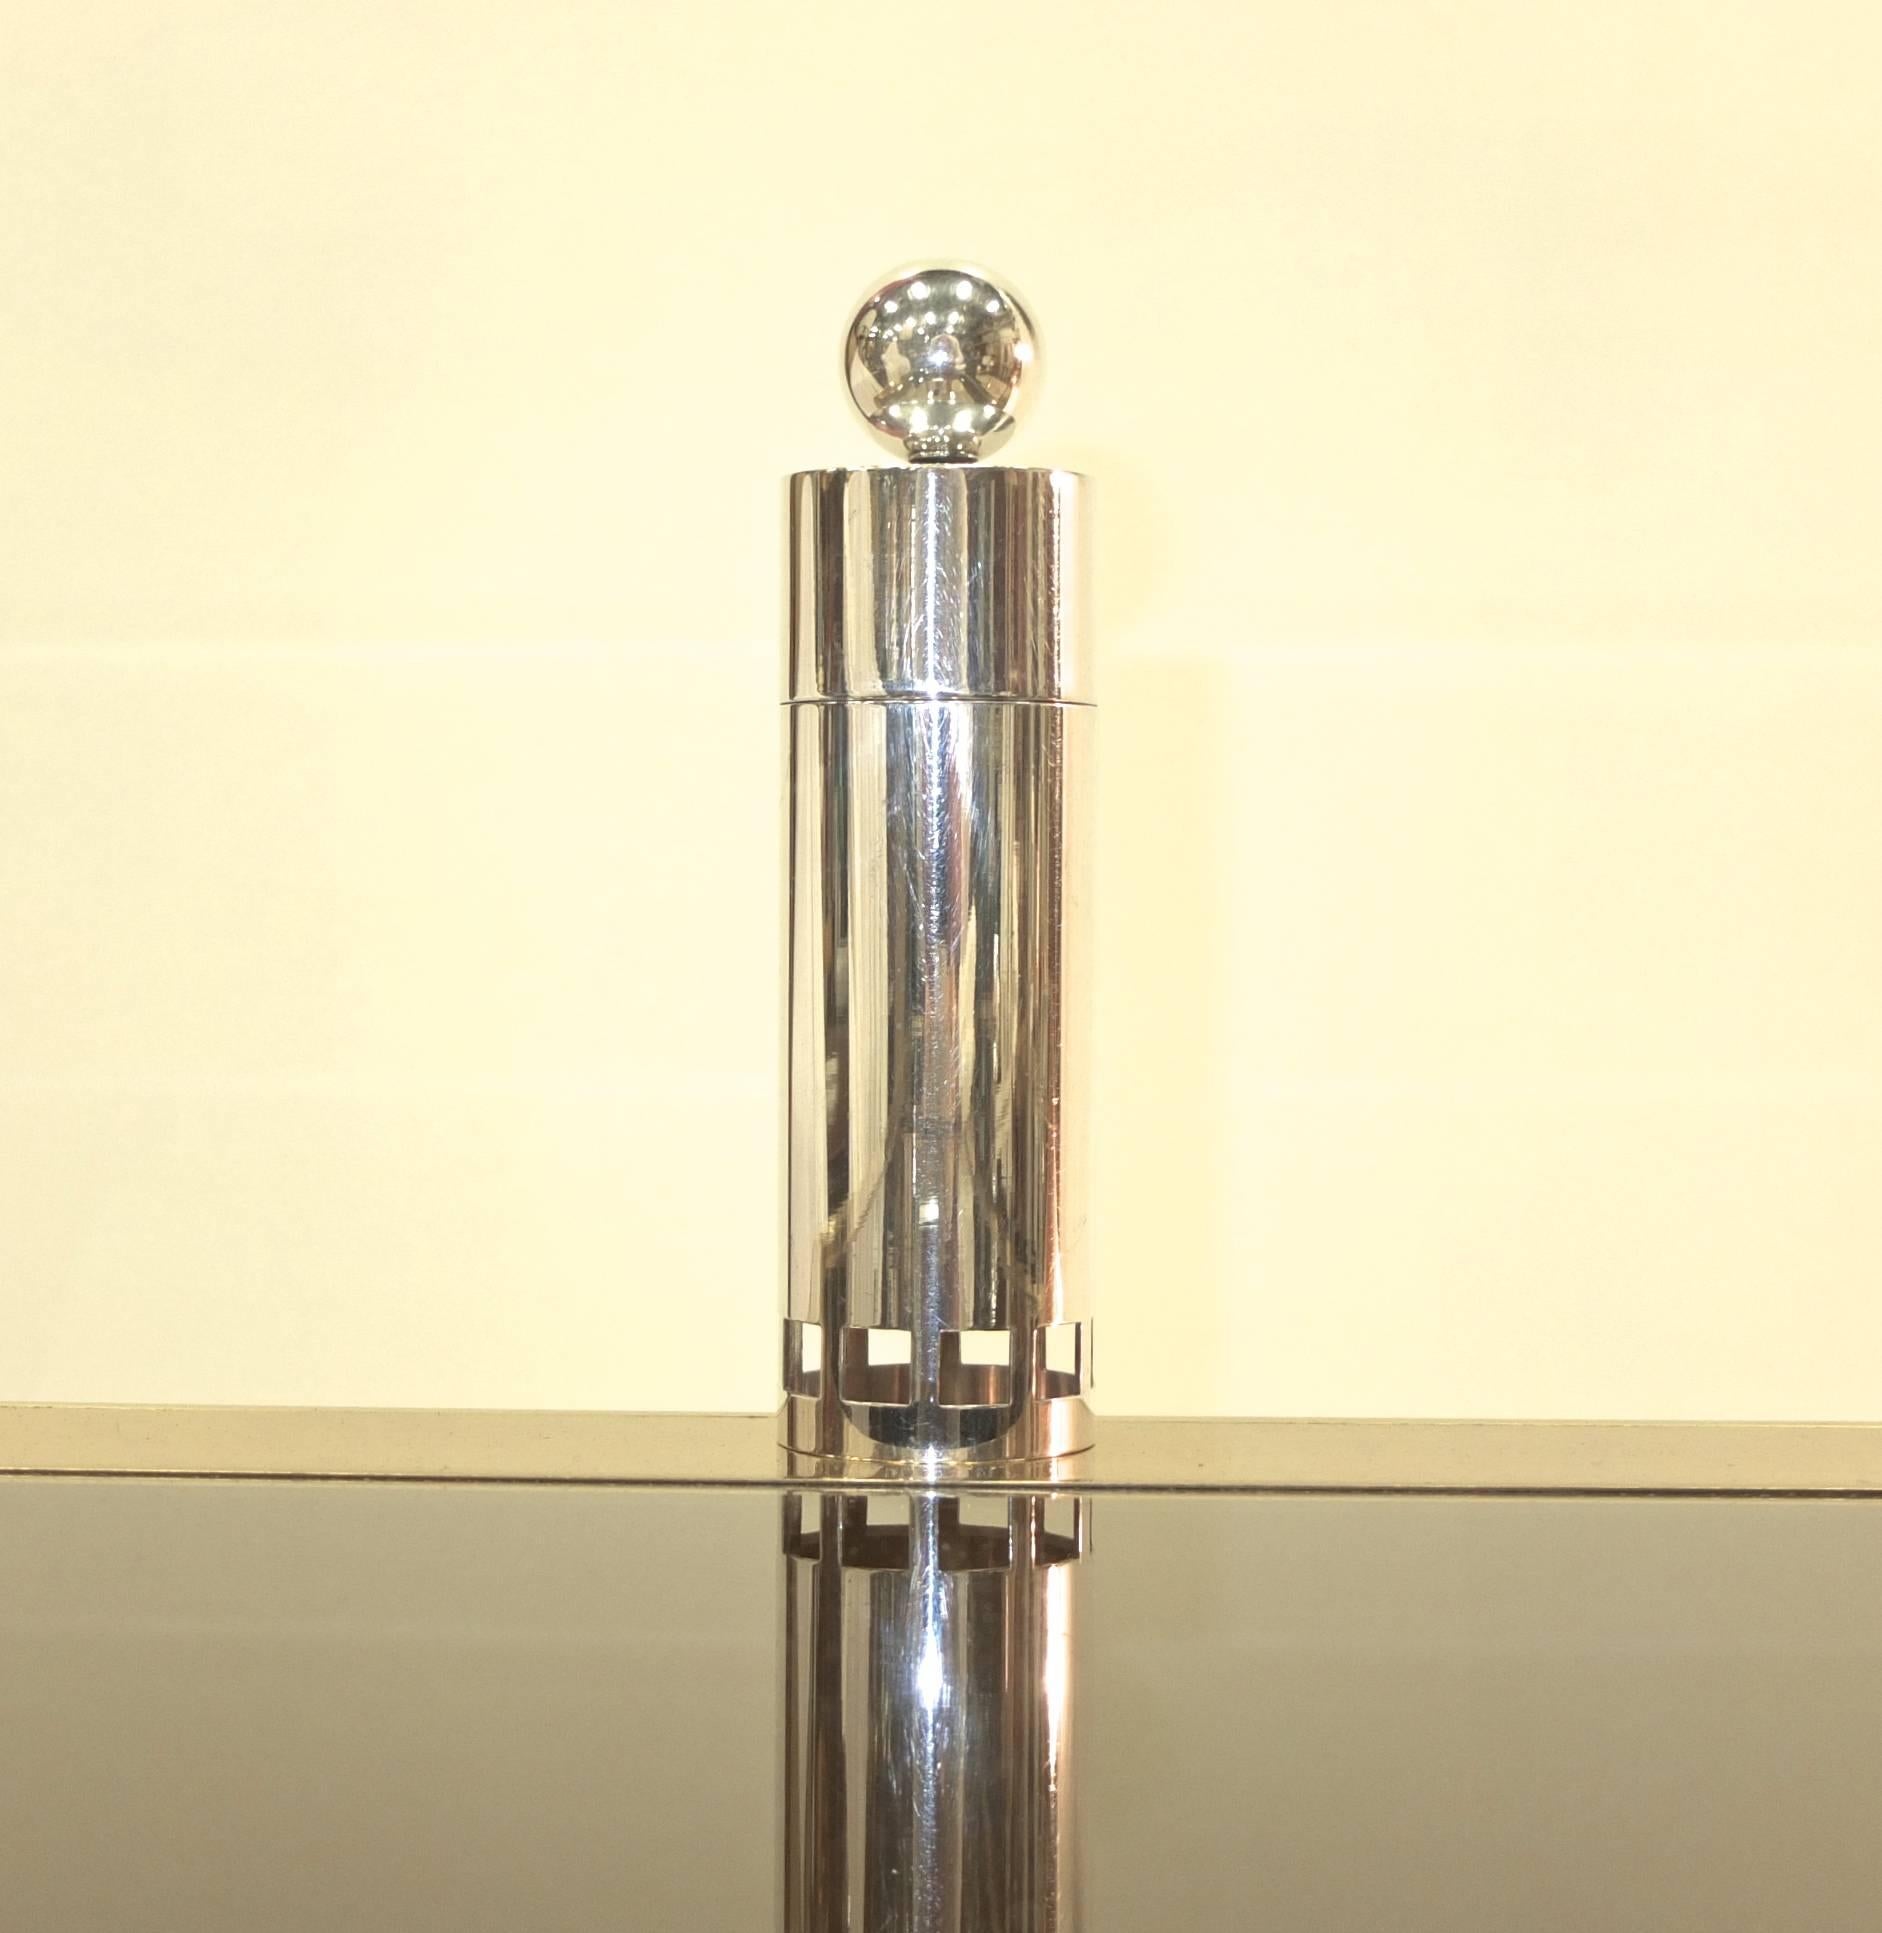 Hefty and well constructed pepper mill designed by uber architect Richard Meier for Swid Powell and produced in Italy, circa 1985.

Ref: Annette Tapert, Swid Powell - Objects by Architects, Rizzoli 1990.